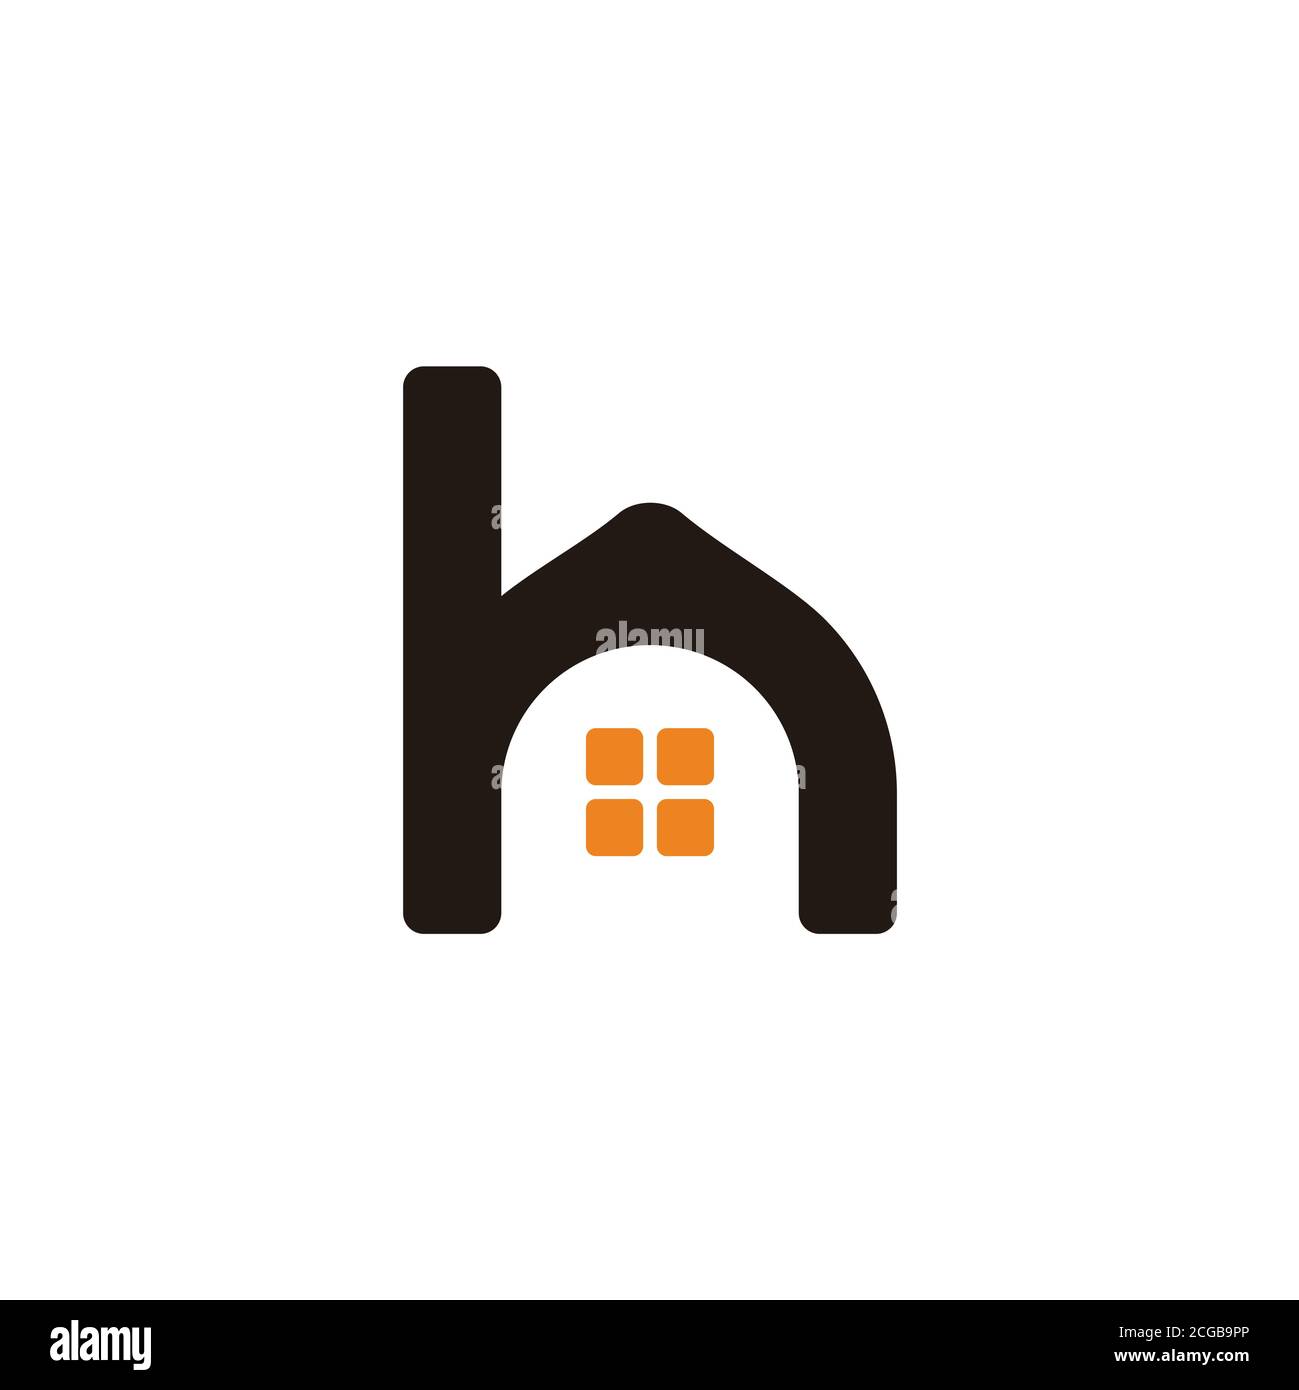 Capital Letter H Images – Browse 27 Stock Photos, Vectors, and Video